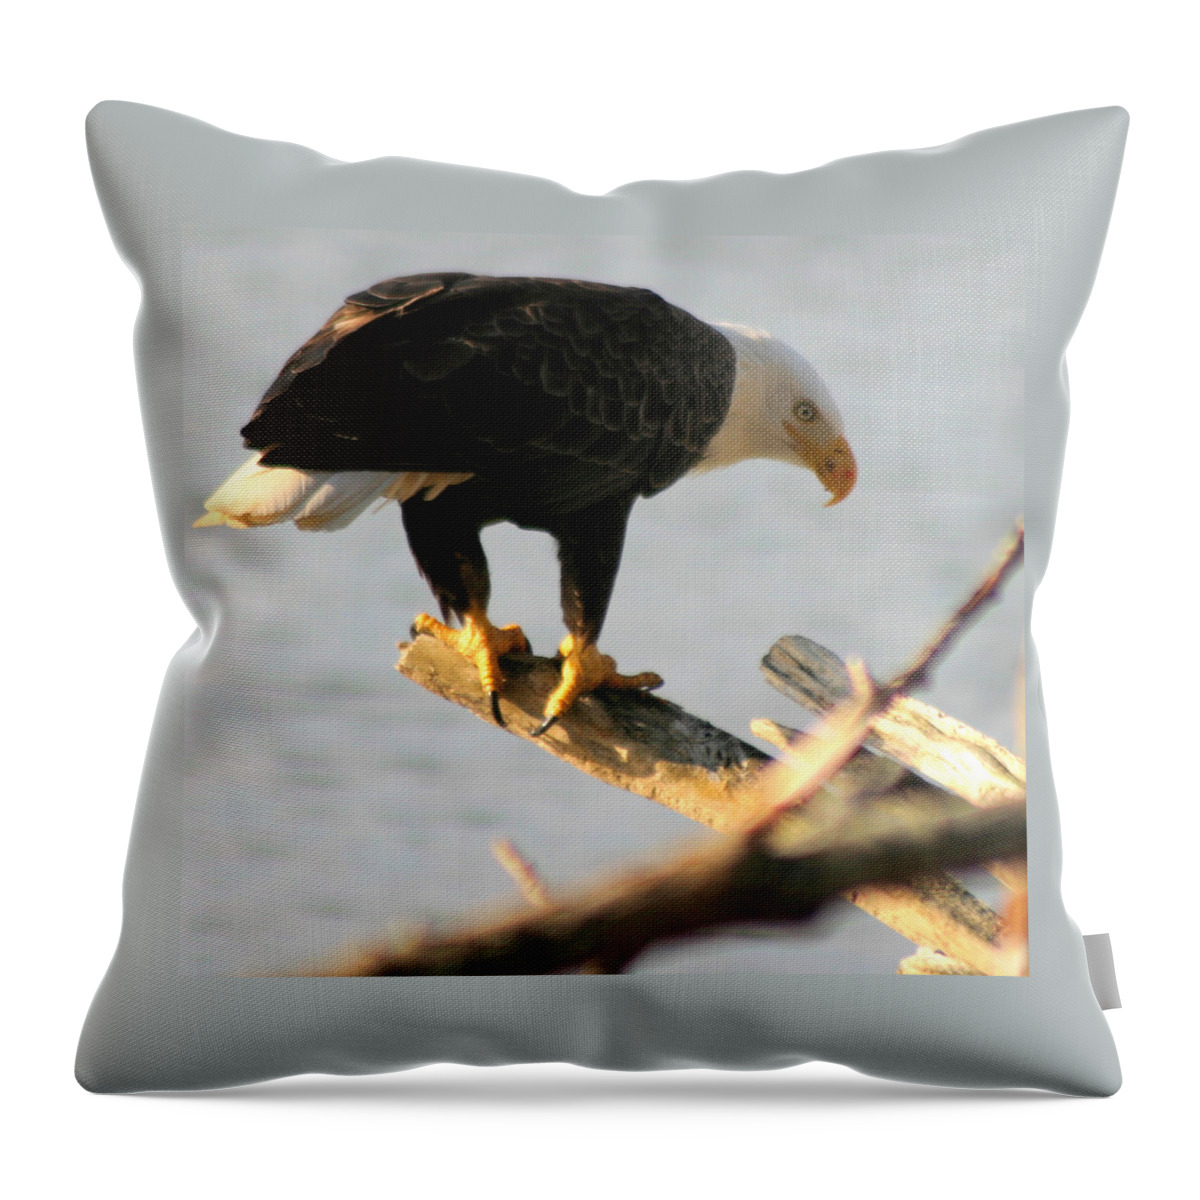 Bald Eagle Throw Pillow featuring the photograph Eagle On His Perch by Kym Backland